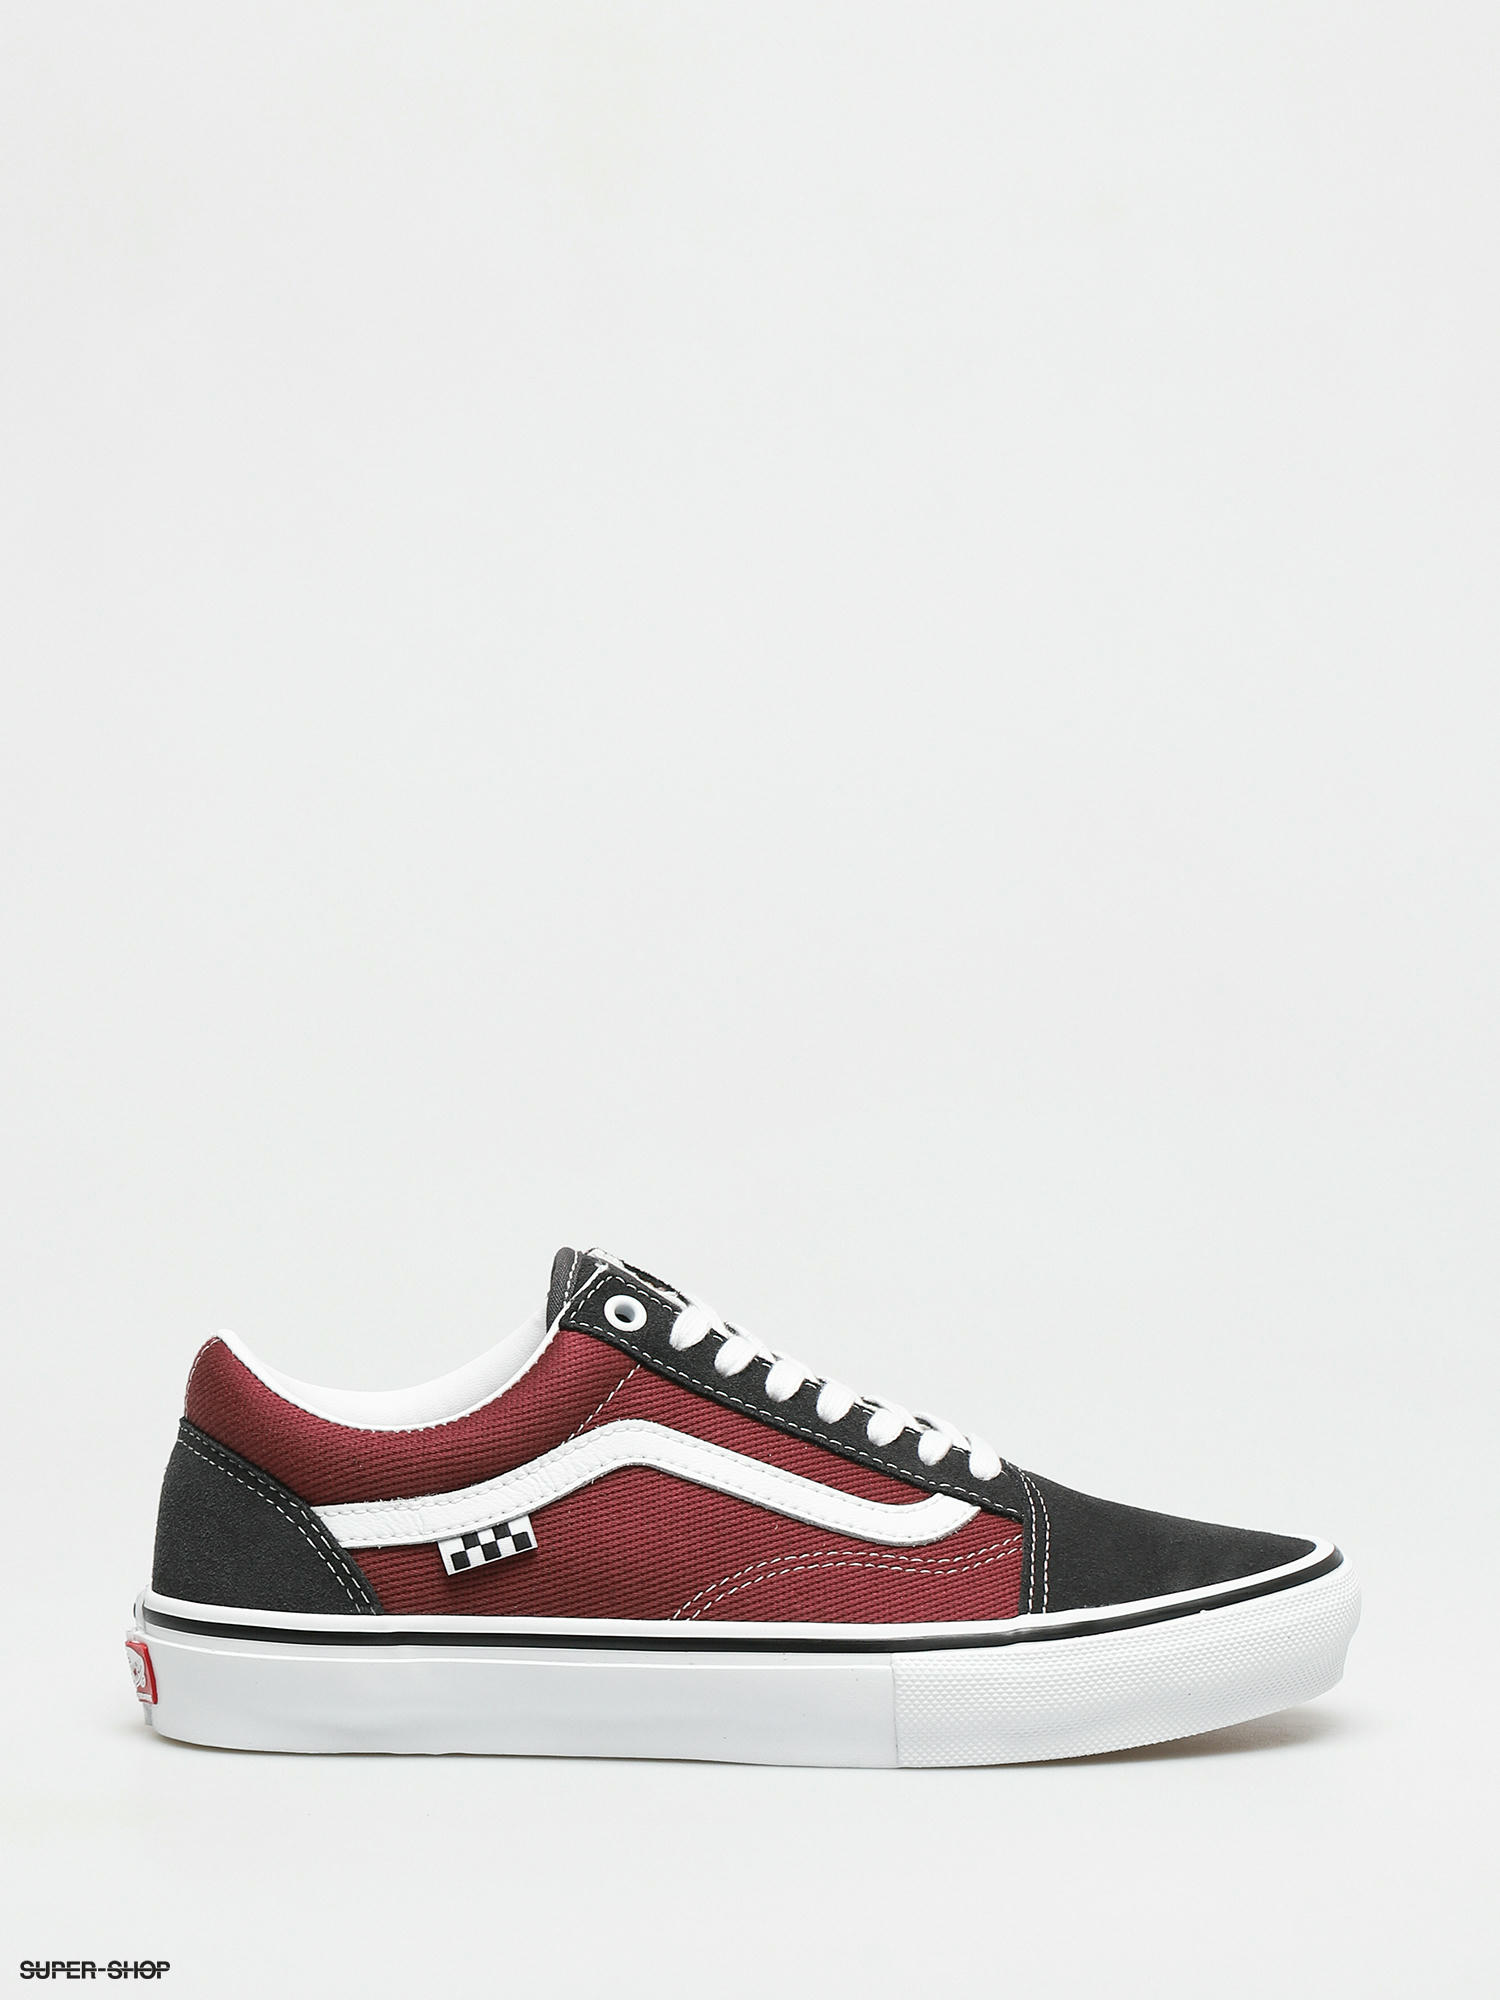 vans shoes made in indonesia